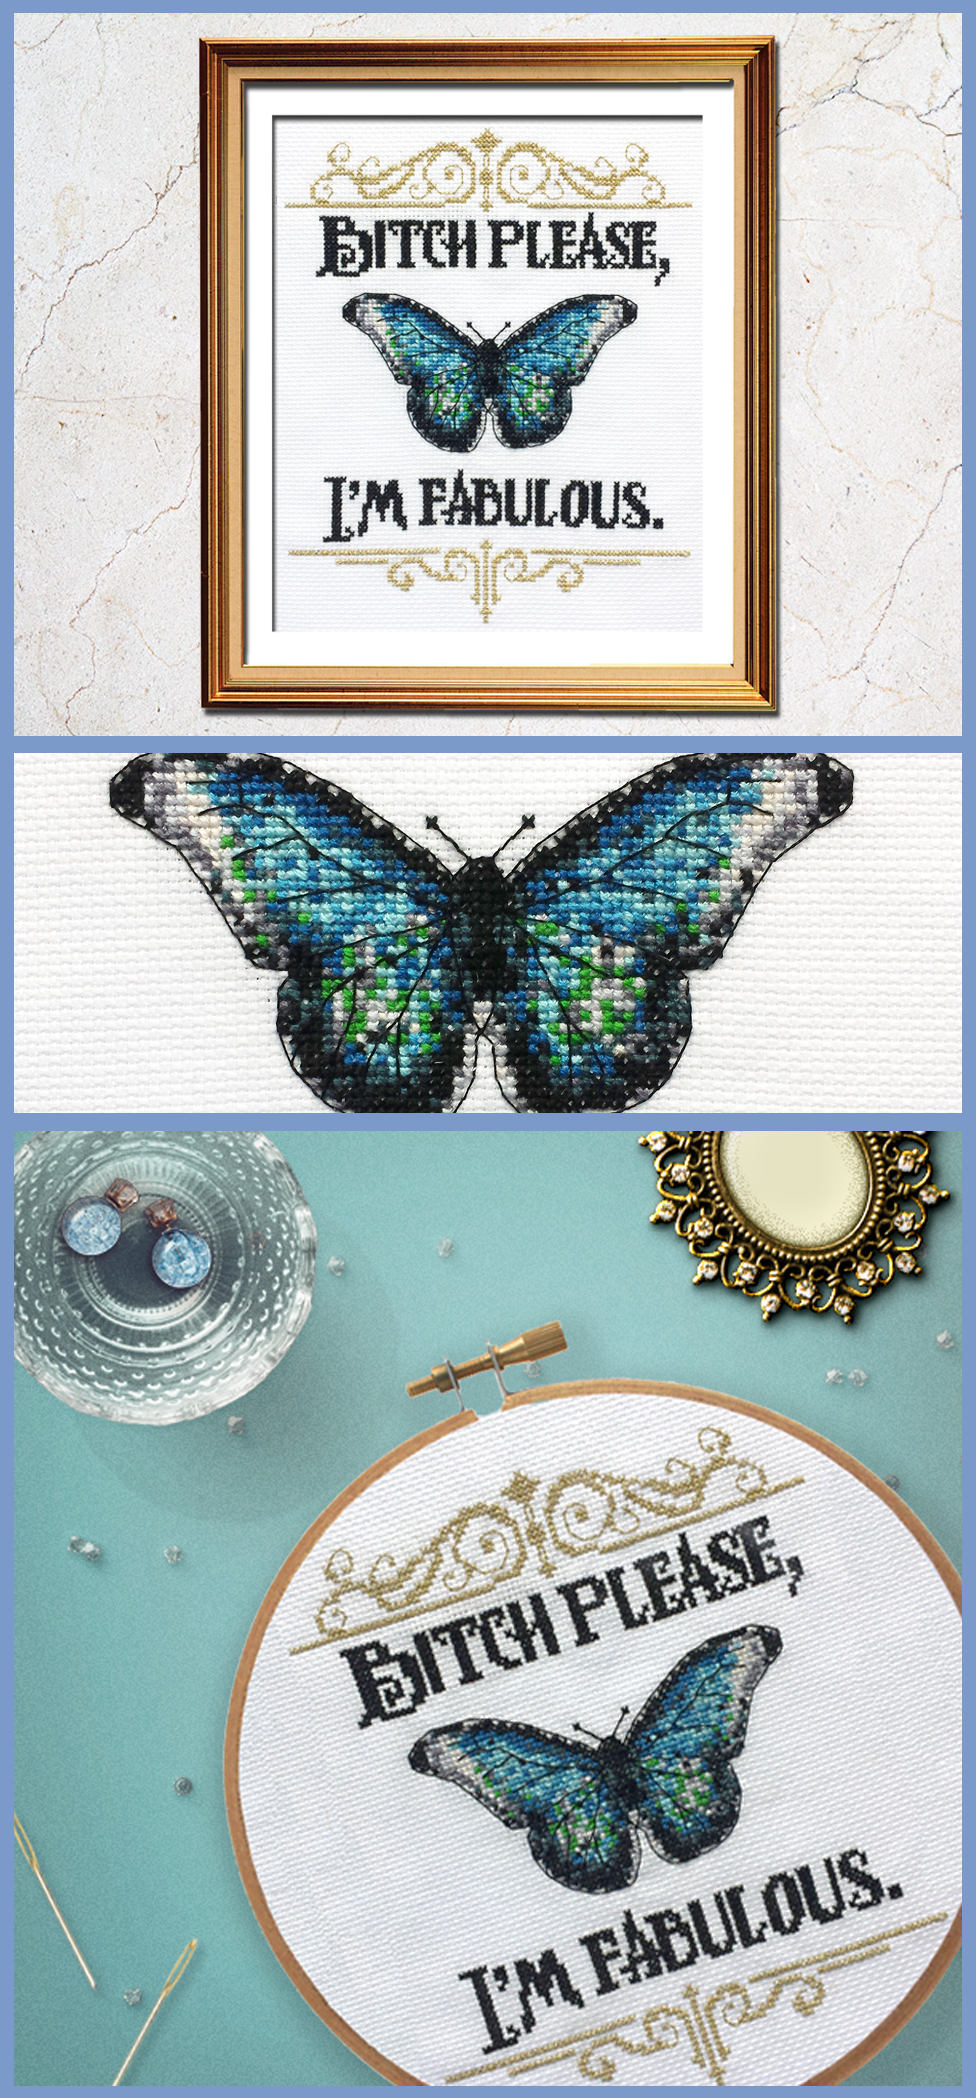 Check out this beautiful butterfly cross stitch! Such a funny cross stitch pattern.